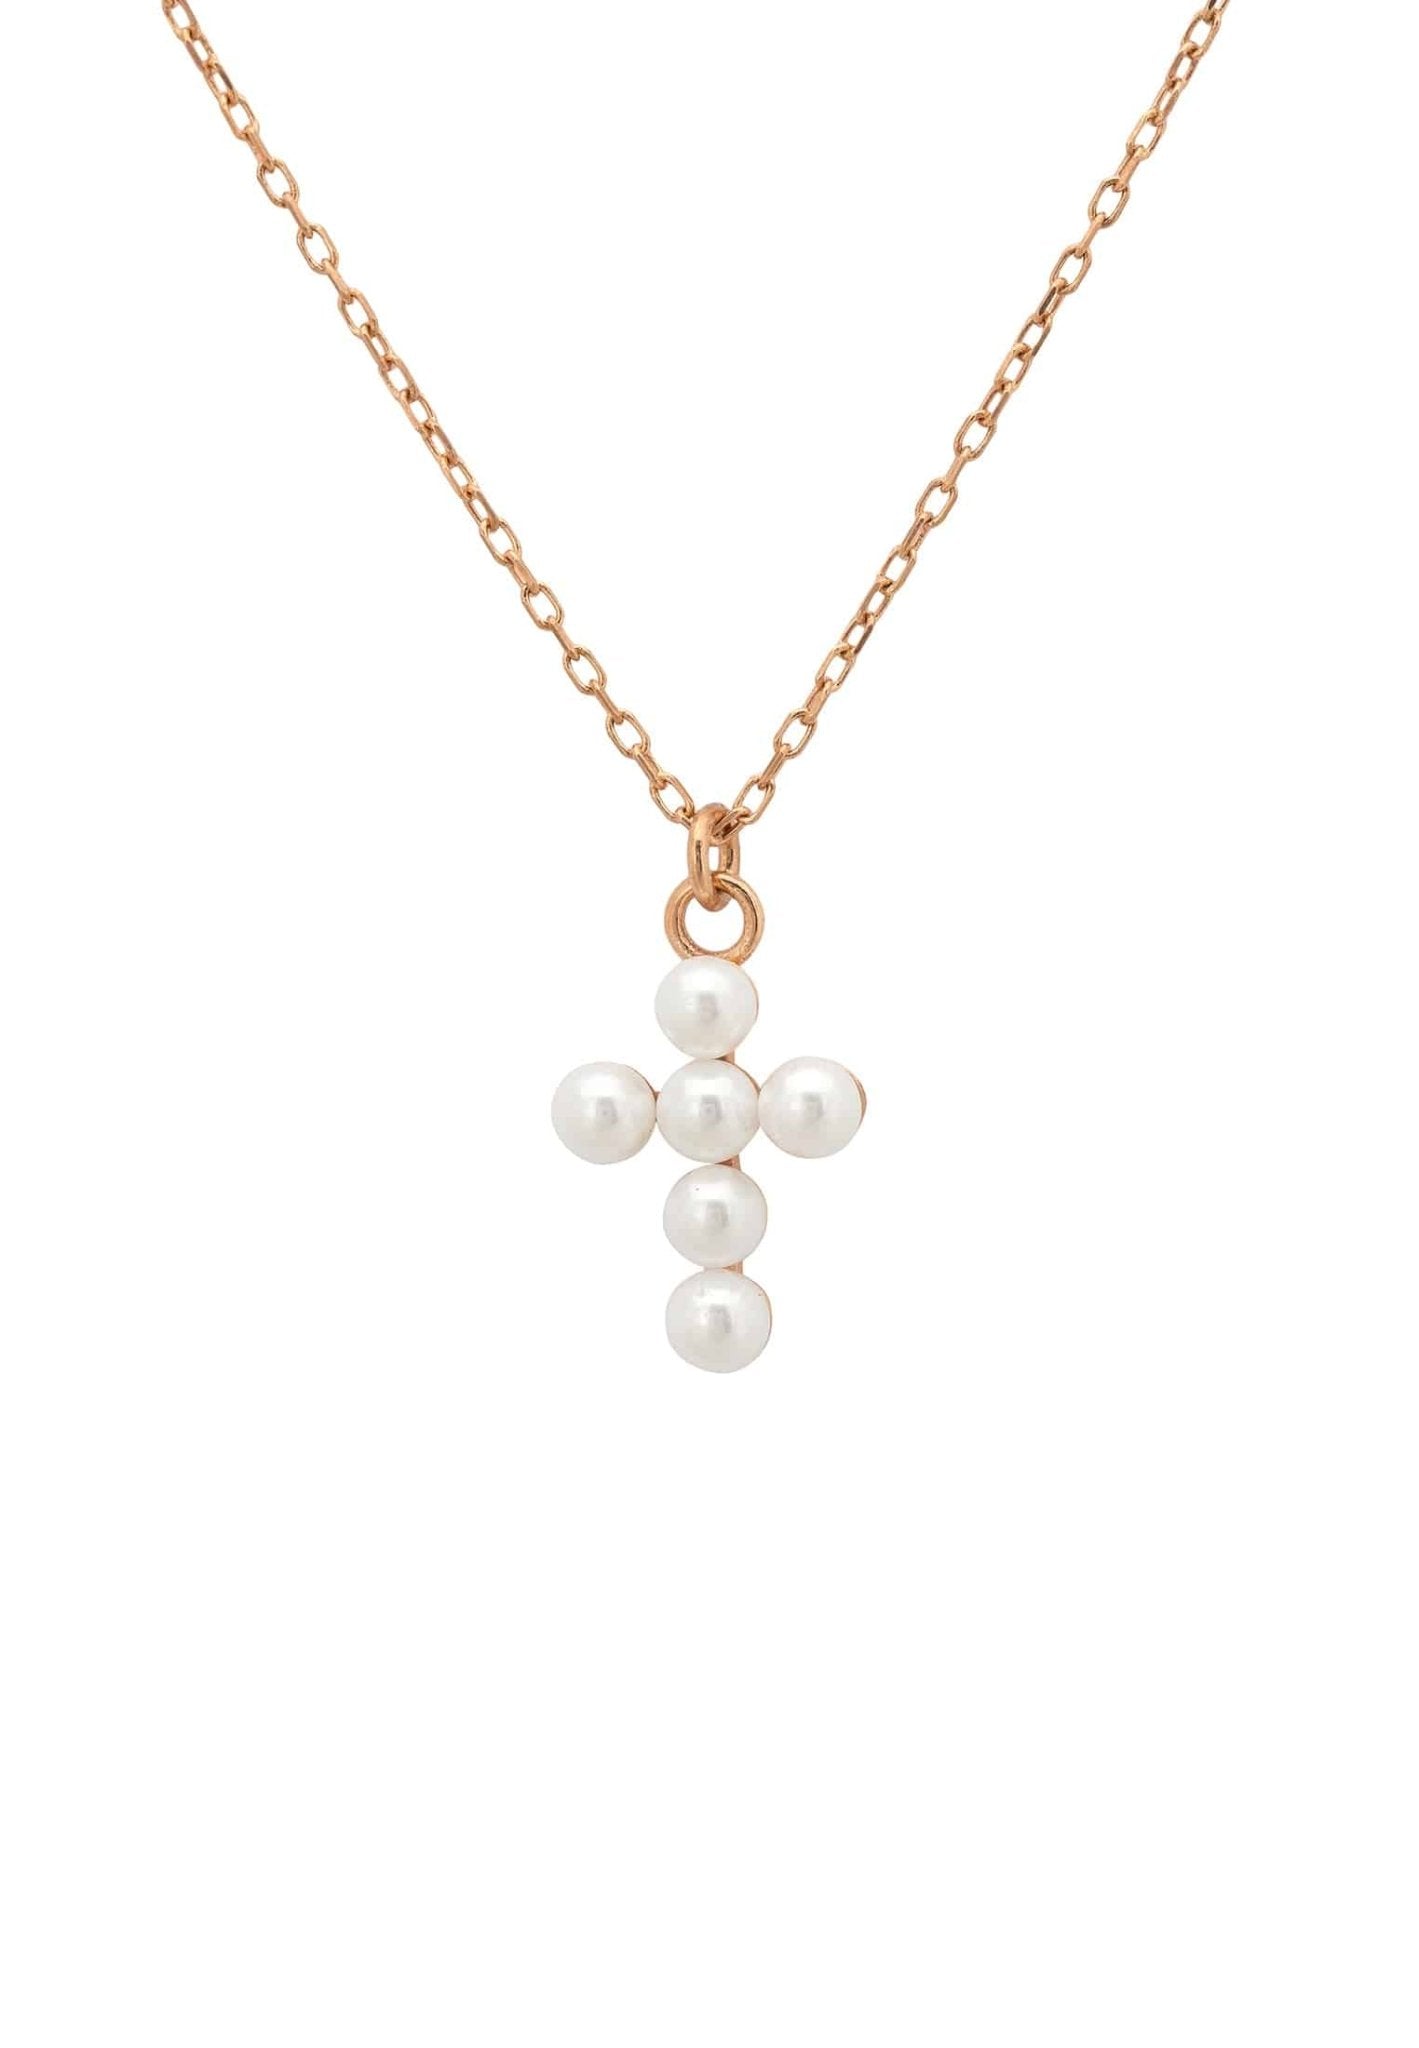 Pearl Cross Necklace Rosegold - LATELITA Necklaces